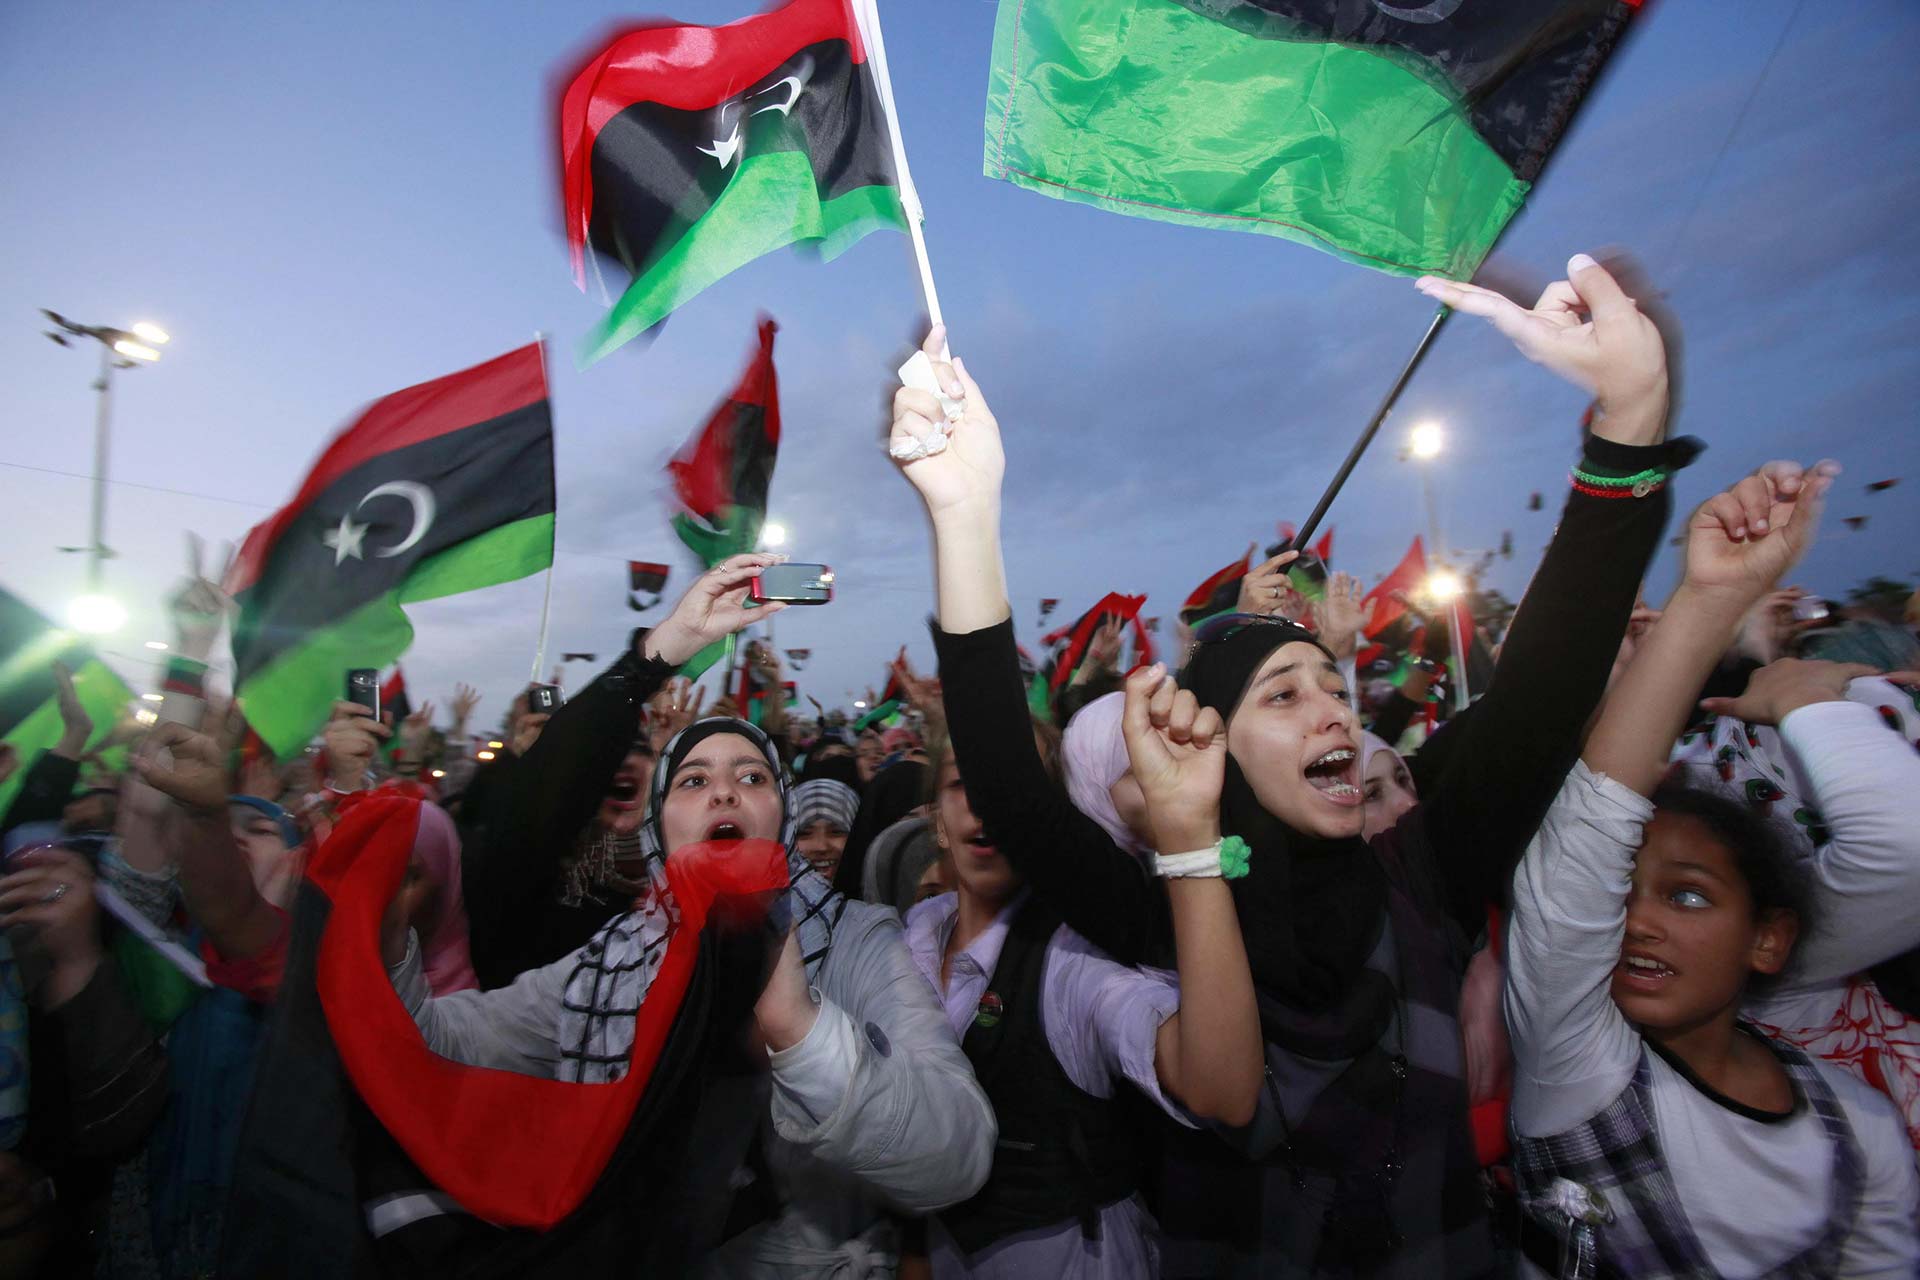 Women celebrate the overthrow of the Gaddafi regime in Misrata, Libya. Credit: Youssef Boudlal / Reuters